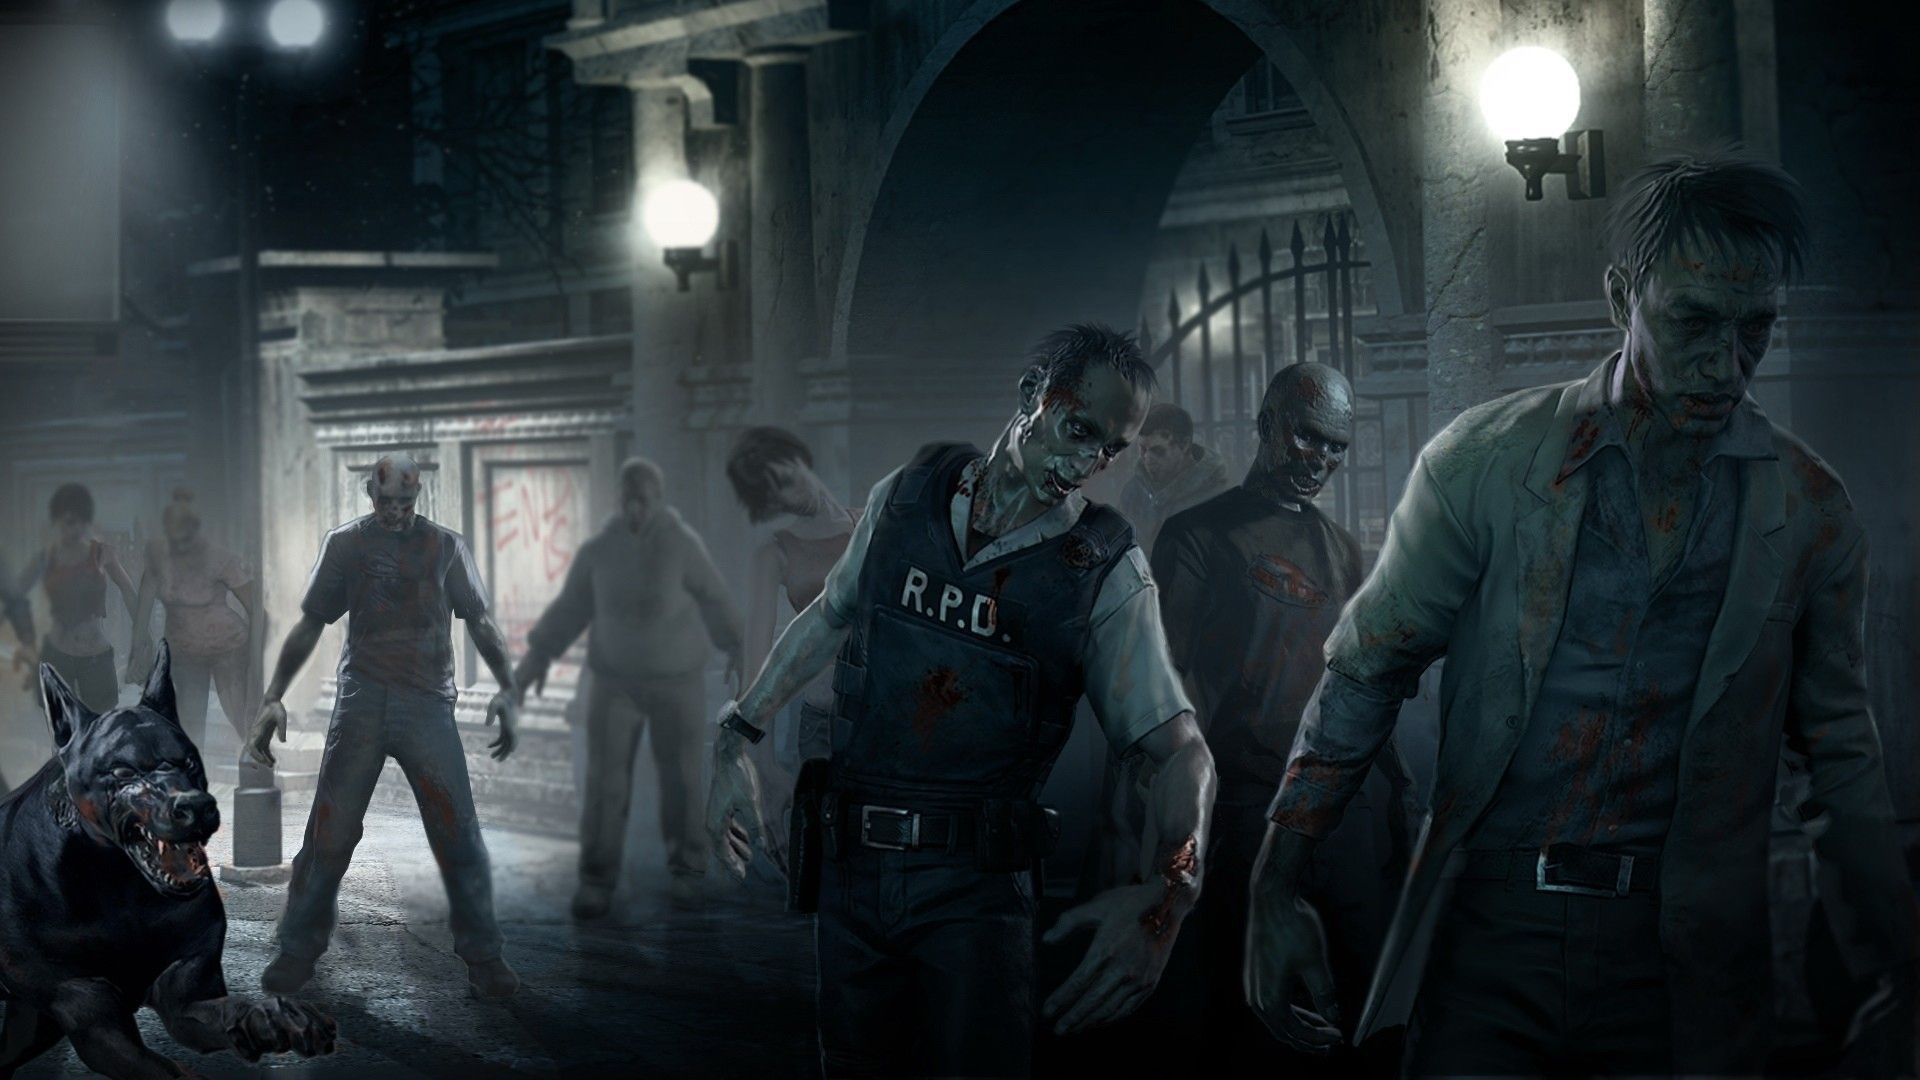 Resident Evil zombies, Iconic franchise, Thrilling video game, Undead horror, 1920x1080 Full HD Desktop